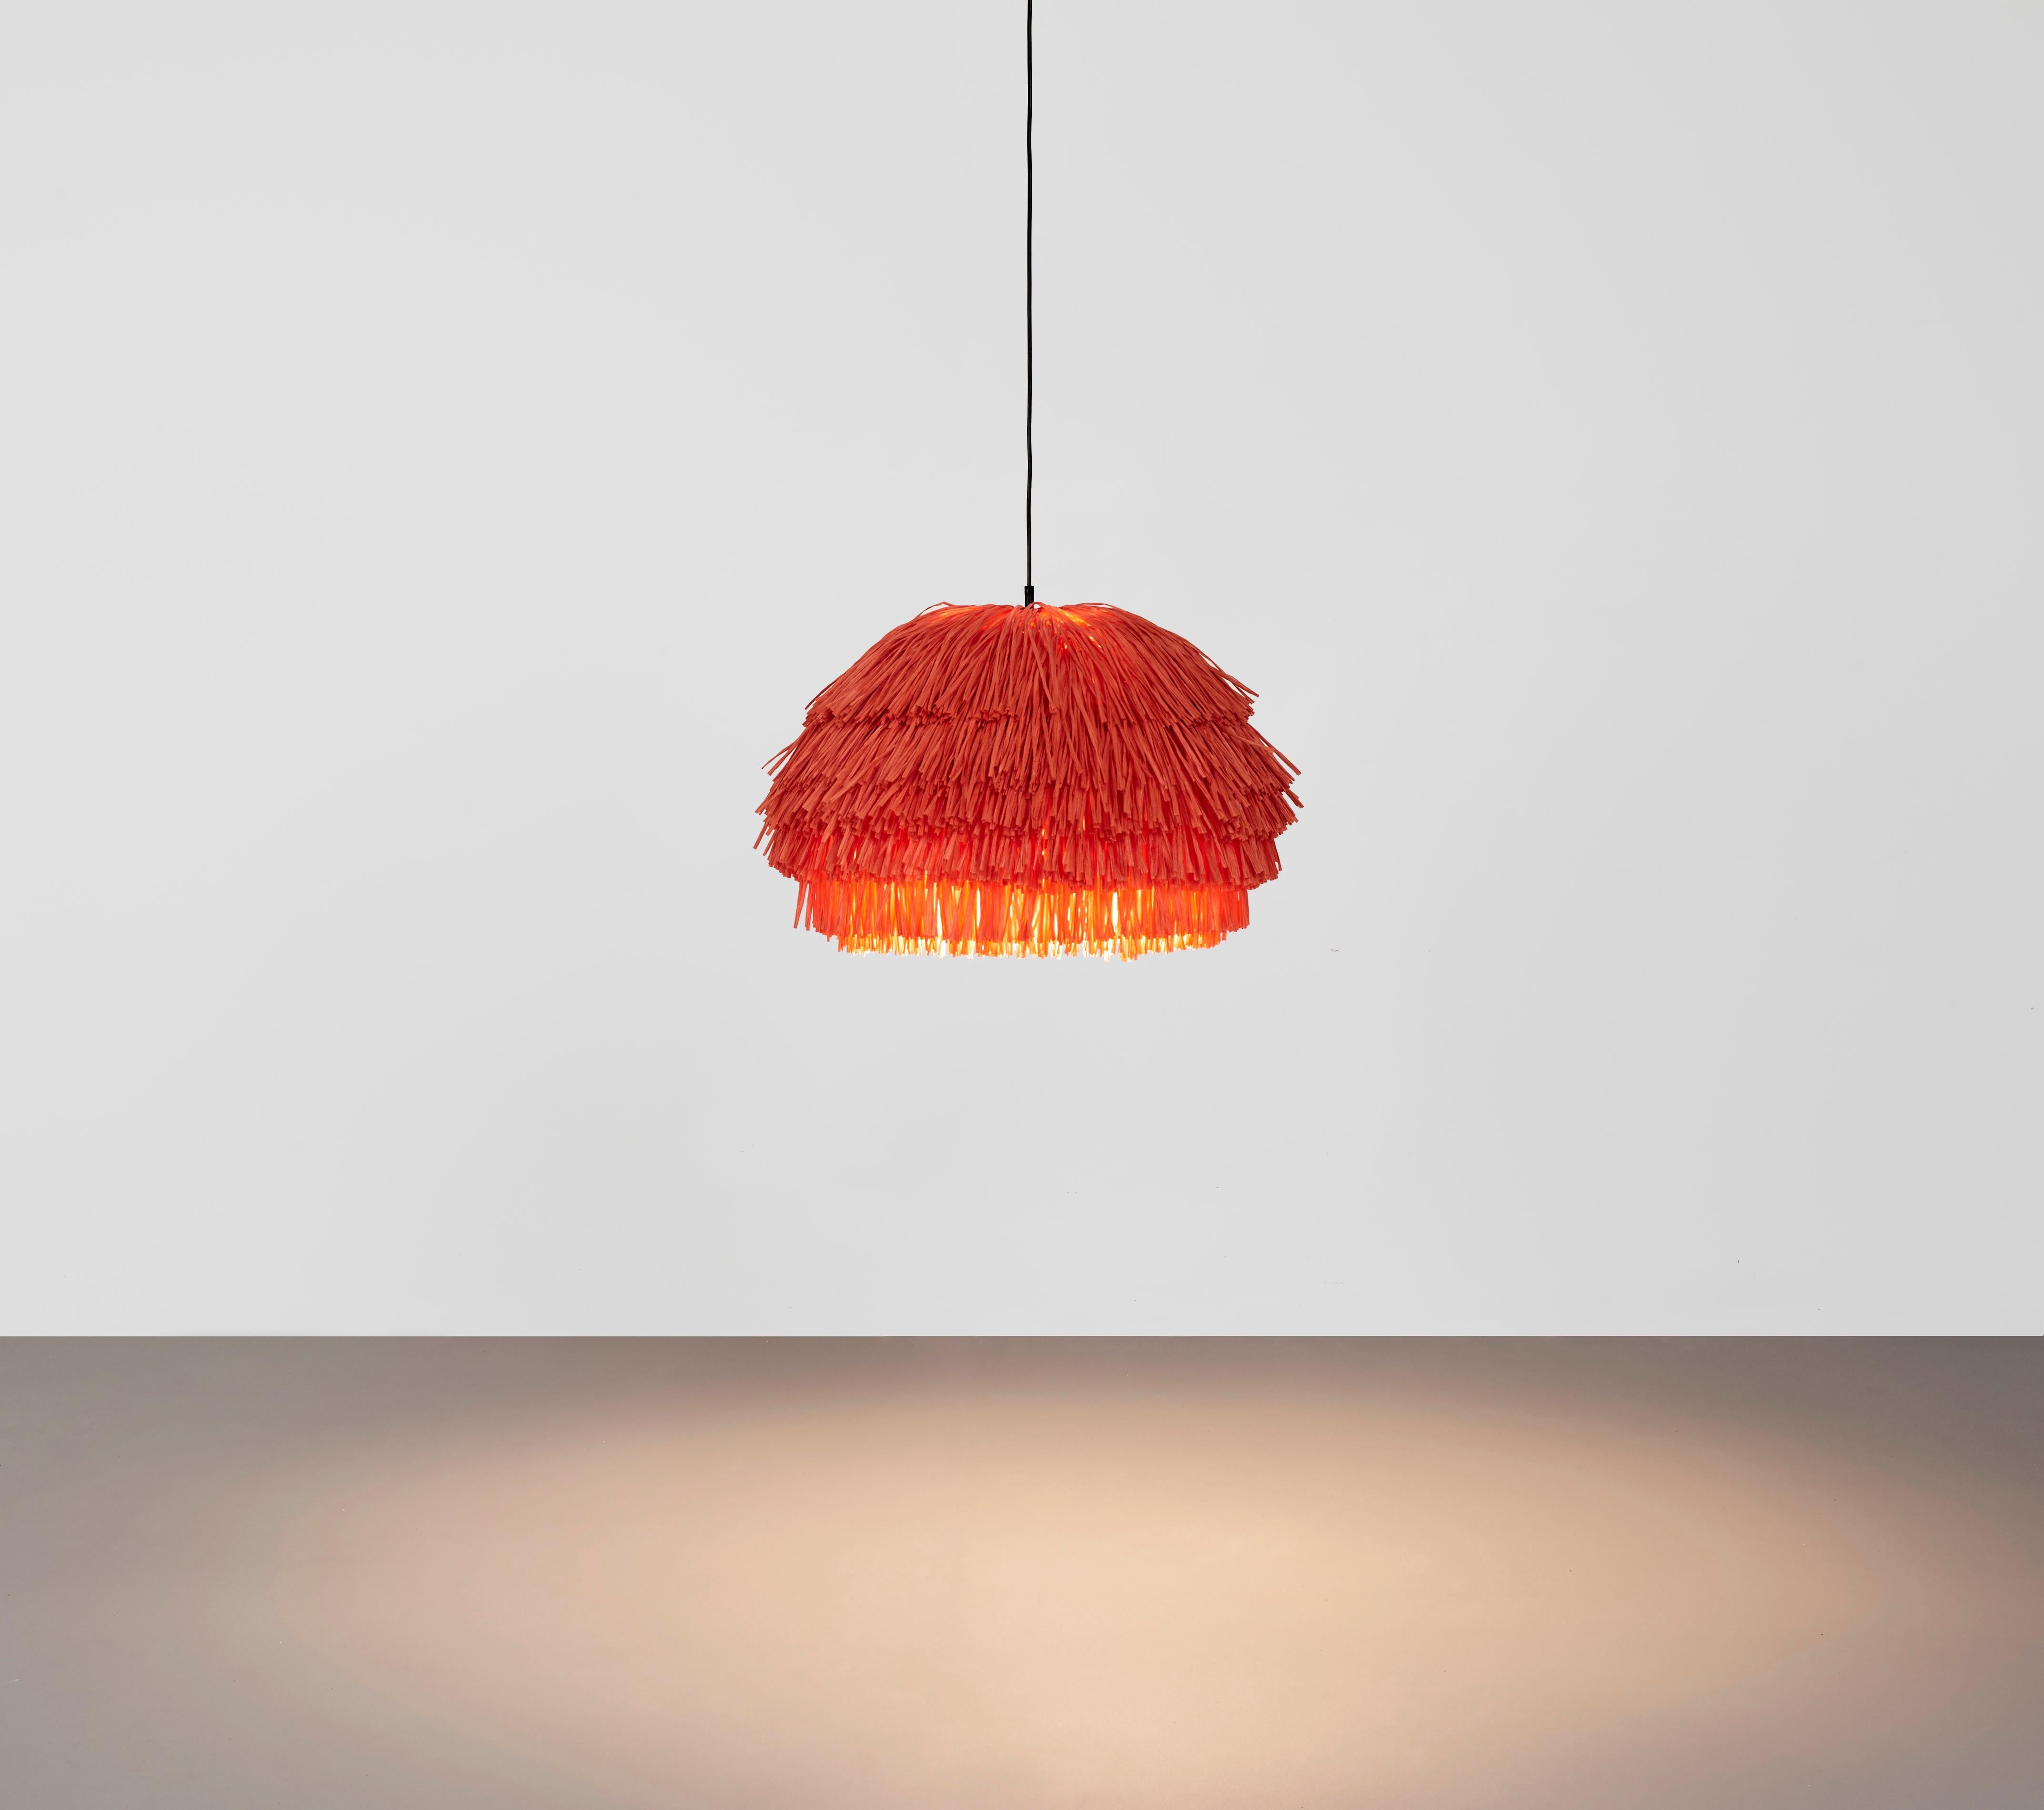 Red Fran CS lamp by Llot Llov
Handcrafted Light Object
Dimensions: Ø 65 cm x H: 50 cm
Materials: raffia fringes
Colour: red
Also available in green, beige, black. 

With their bulky silhouette and rustling fringes, the FRAN lights are